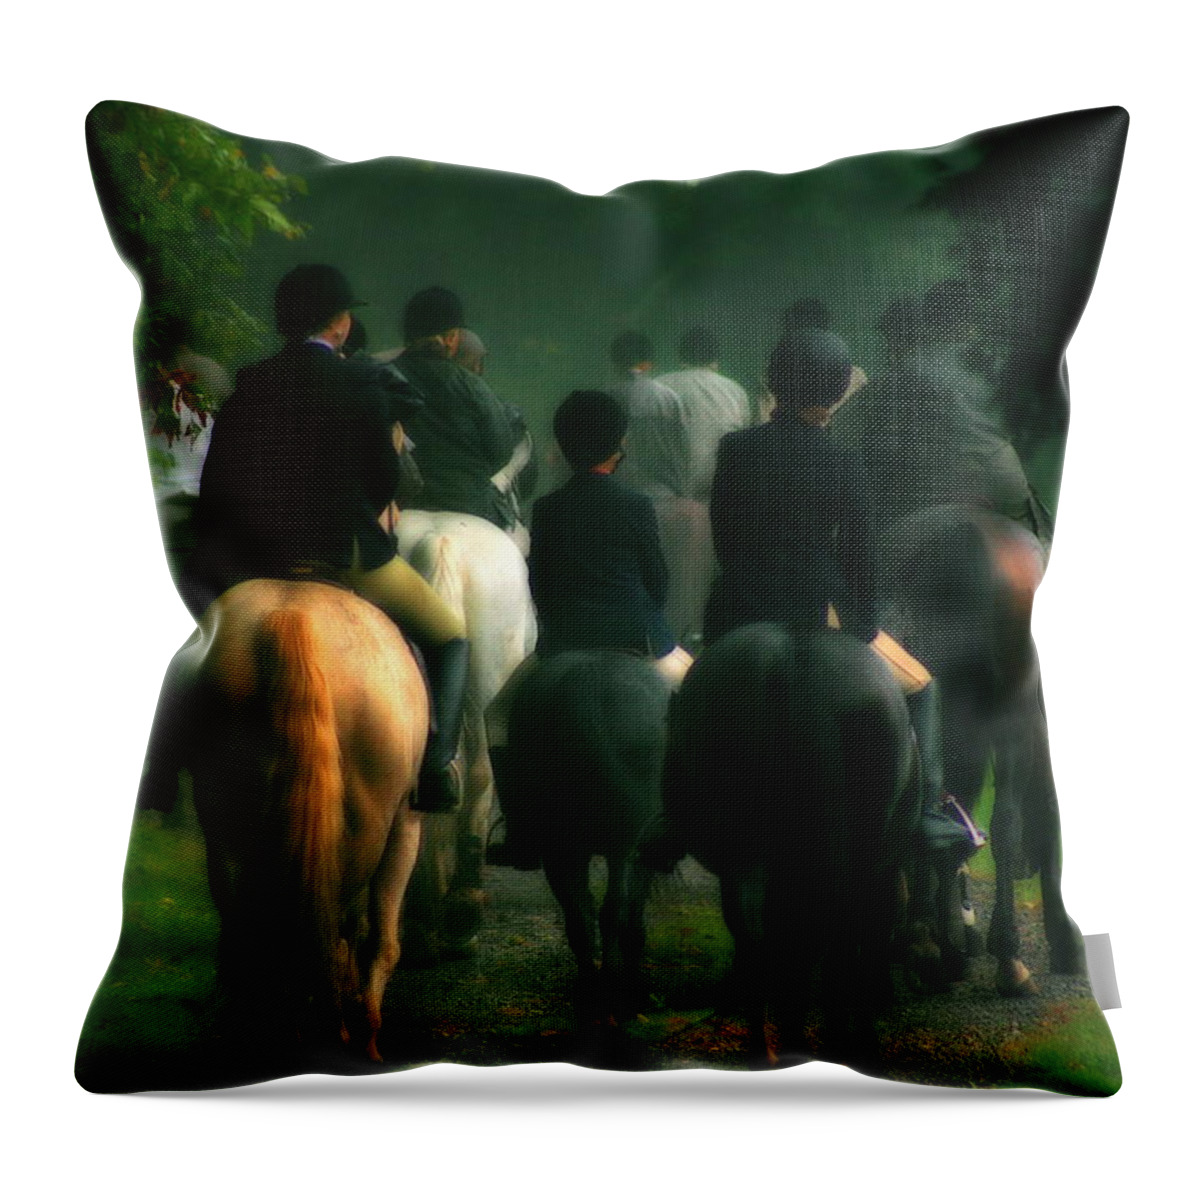  Throw Pillow featuring the photograph The Hunt by Angela Rath